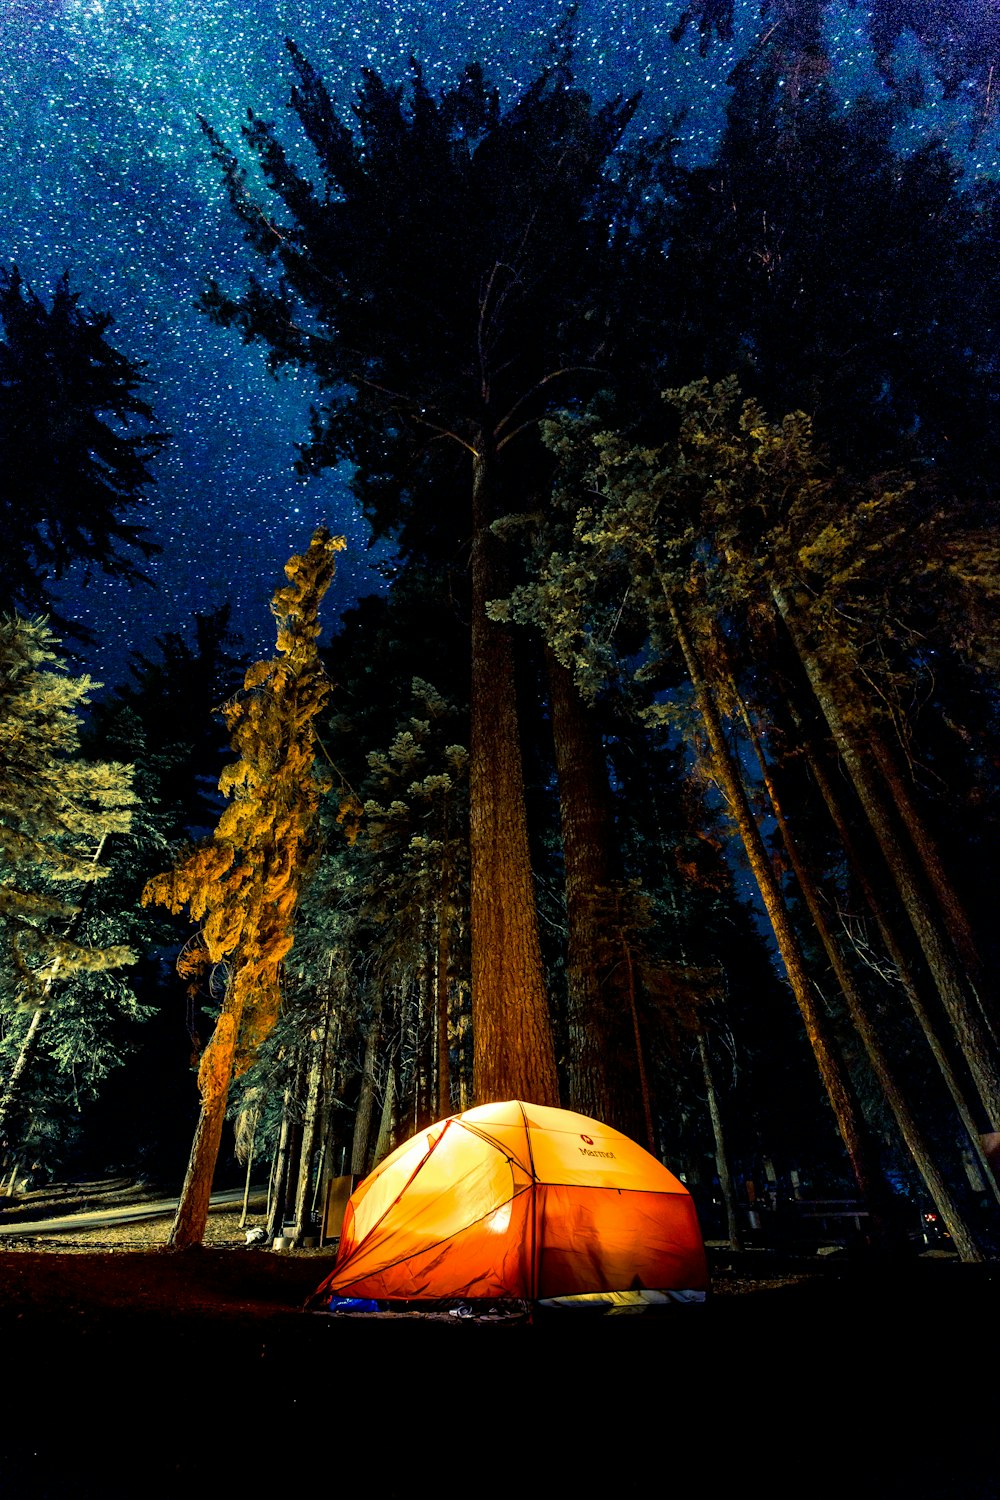 500+ Camping Images [HD] | Download Free Images on Unsplash